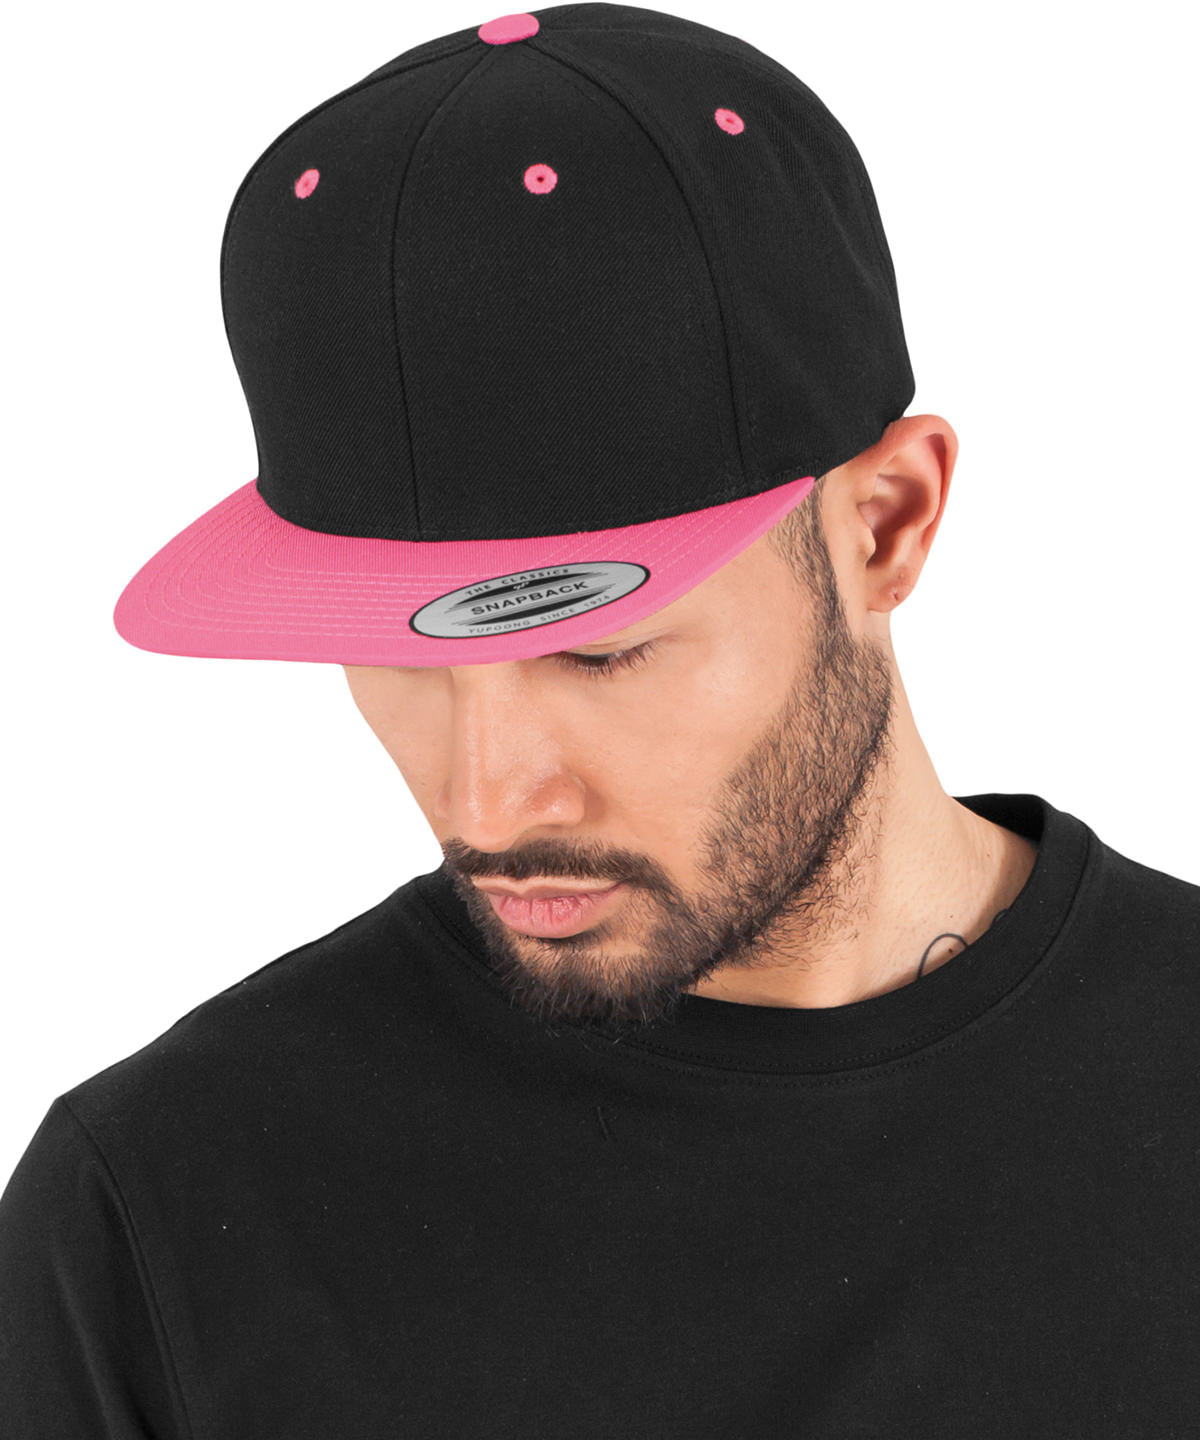 The classic SnapBack Cap 2-tone by Yupoong ~YP002 - Martial Art Superstore